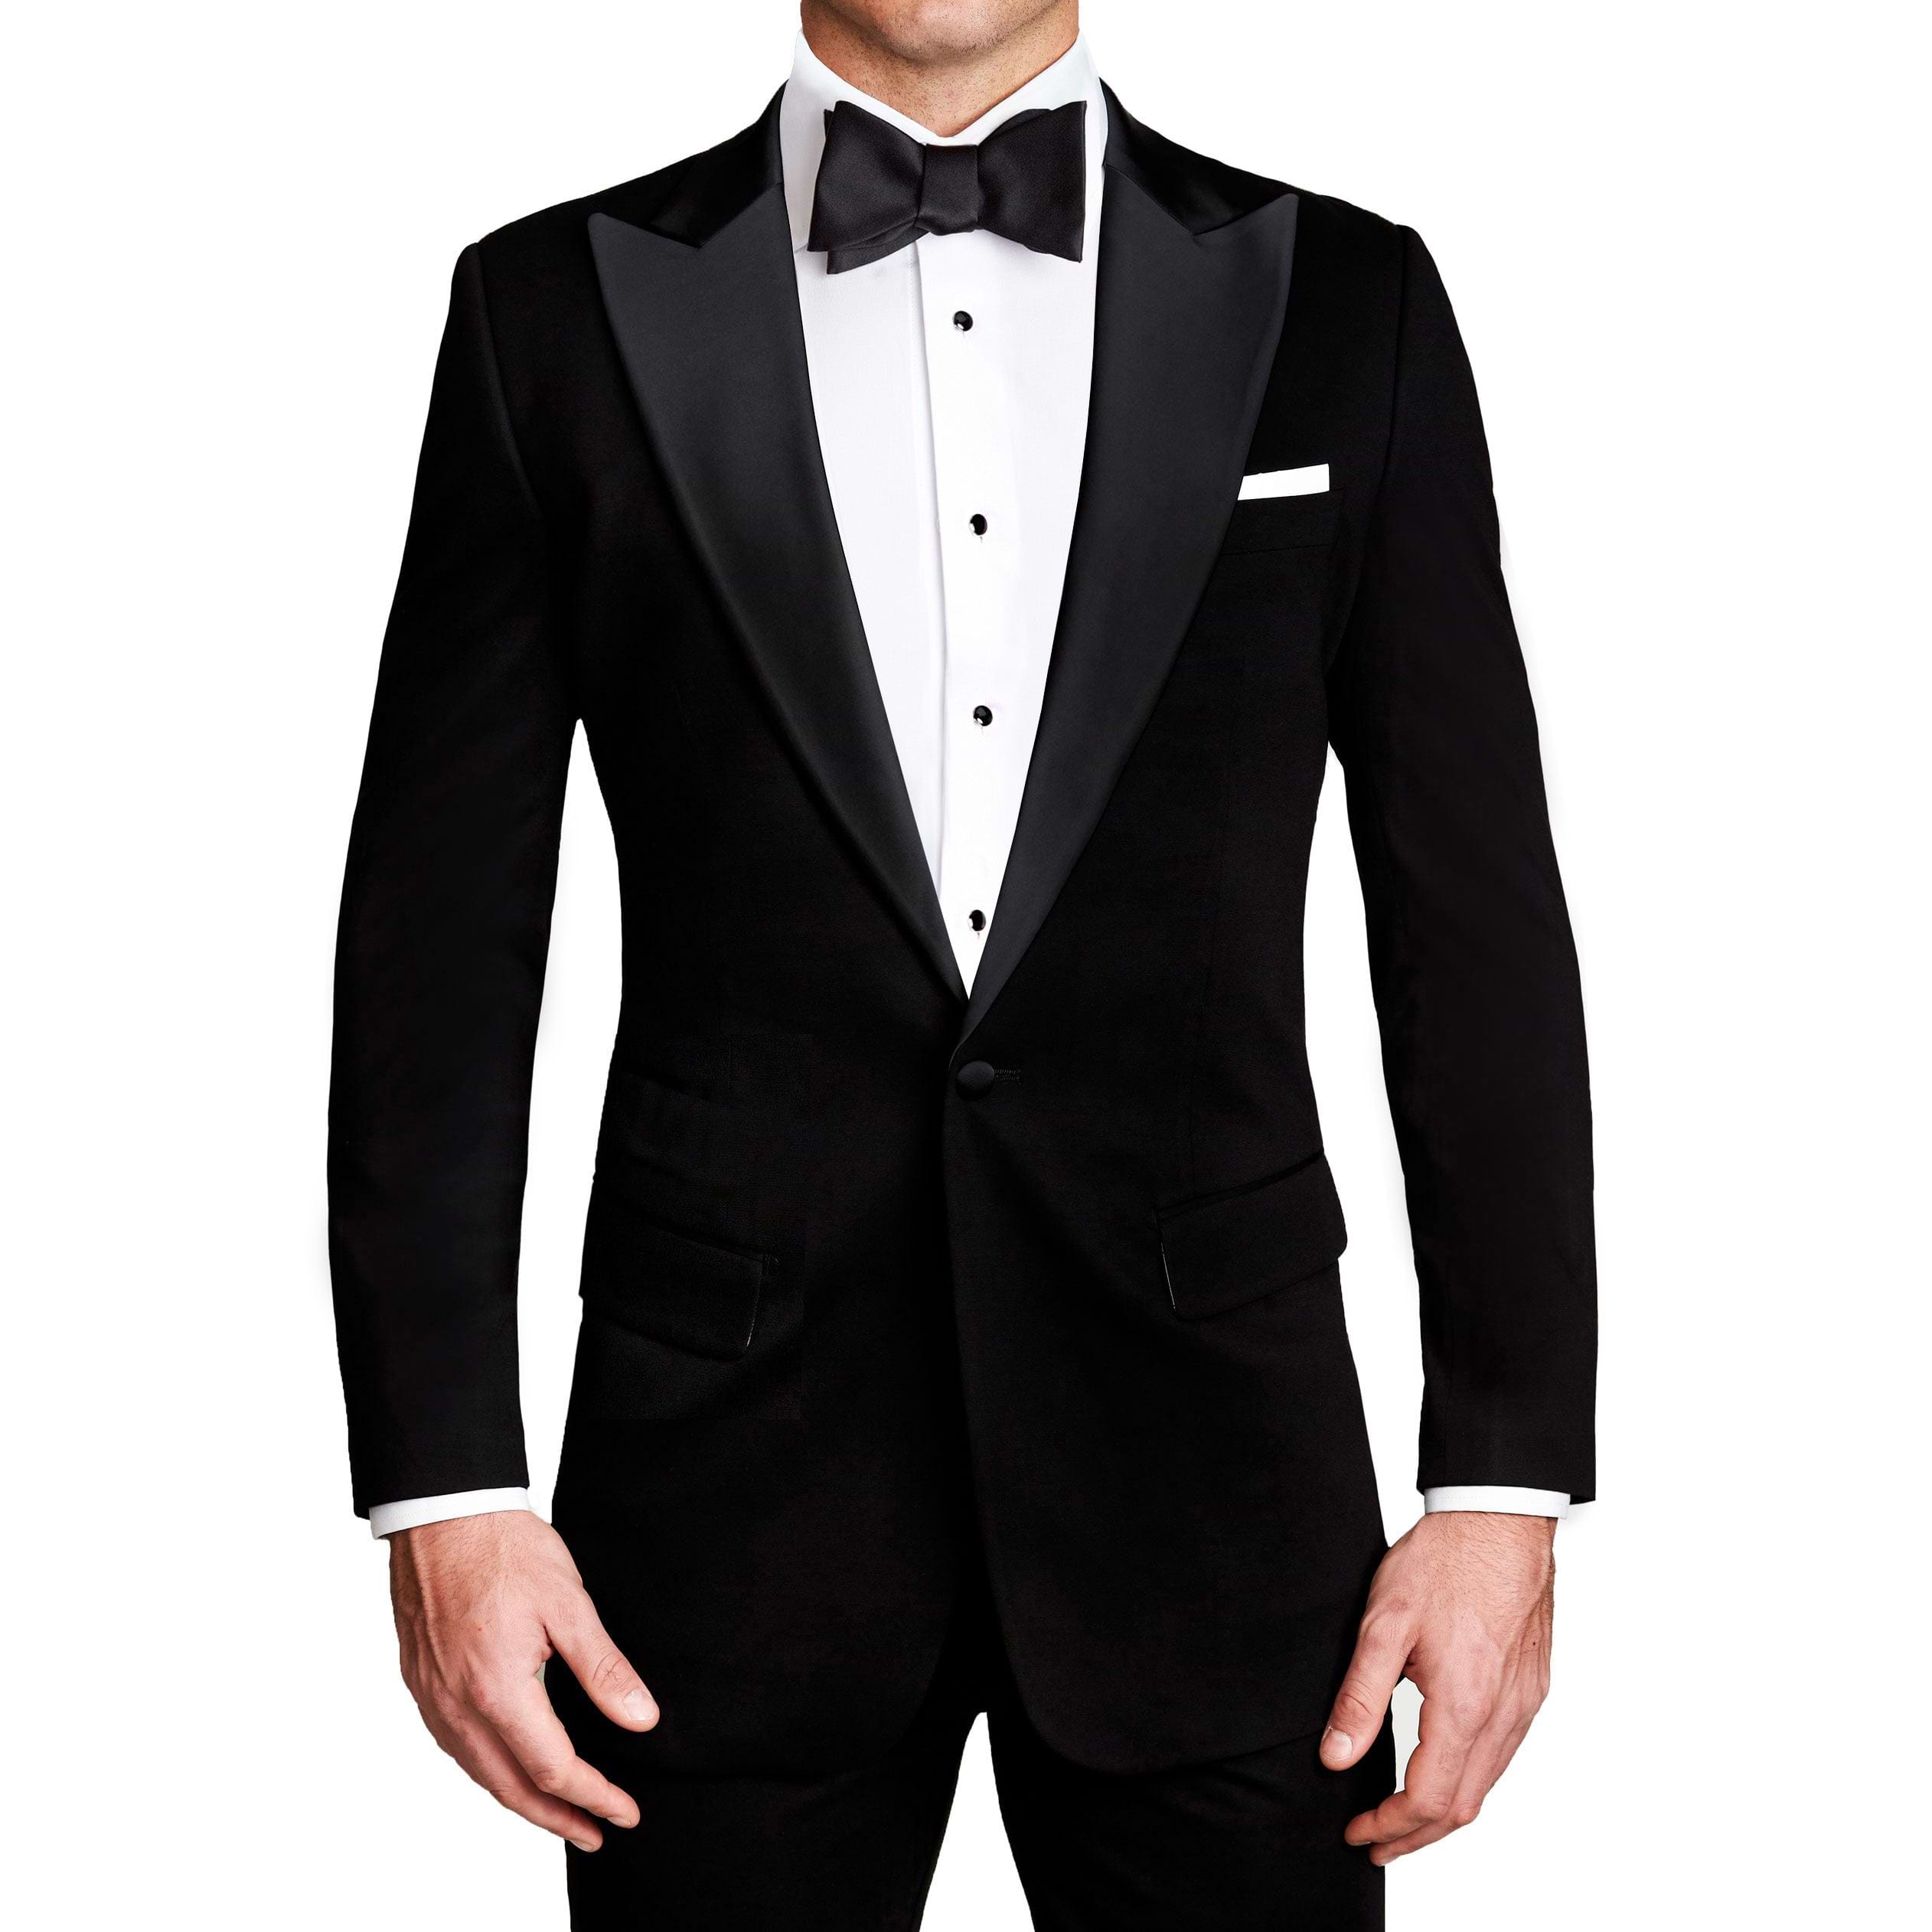 Matching Two Piece Formal Pants And Jacket Set For Weddings And Parties  Fashionable Blazer Suit From Paomiao, $65.41 | DHgate.Com